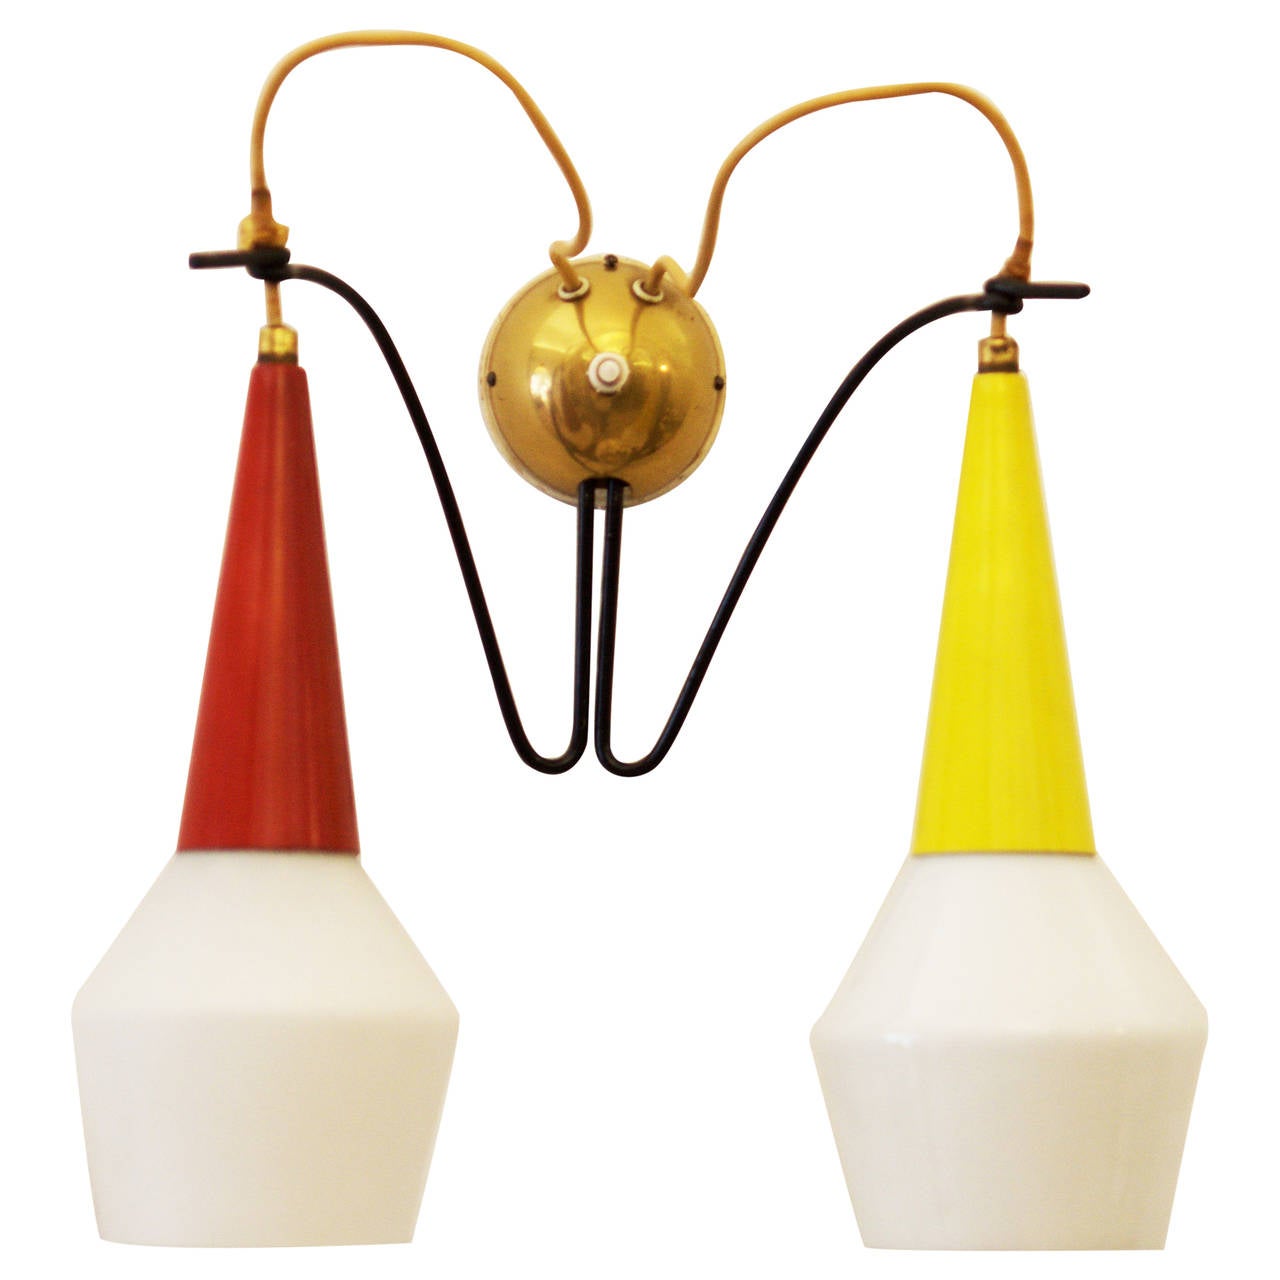 Sconces by Rupert Nikoll, from Early 1950s